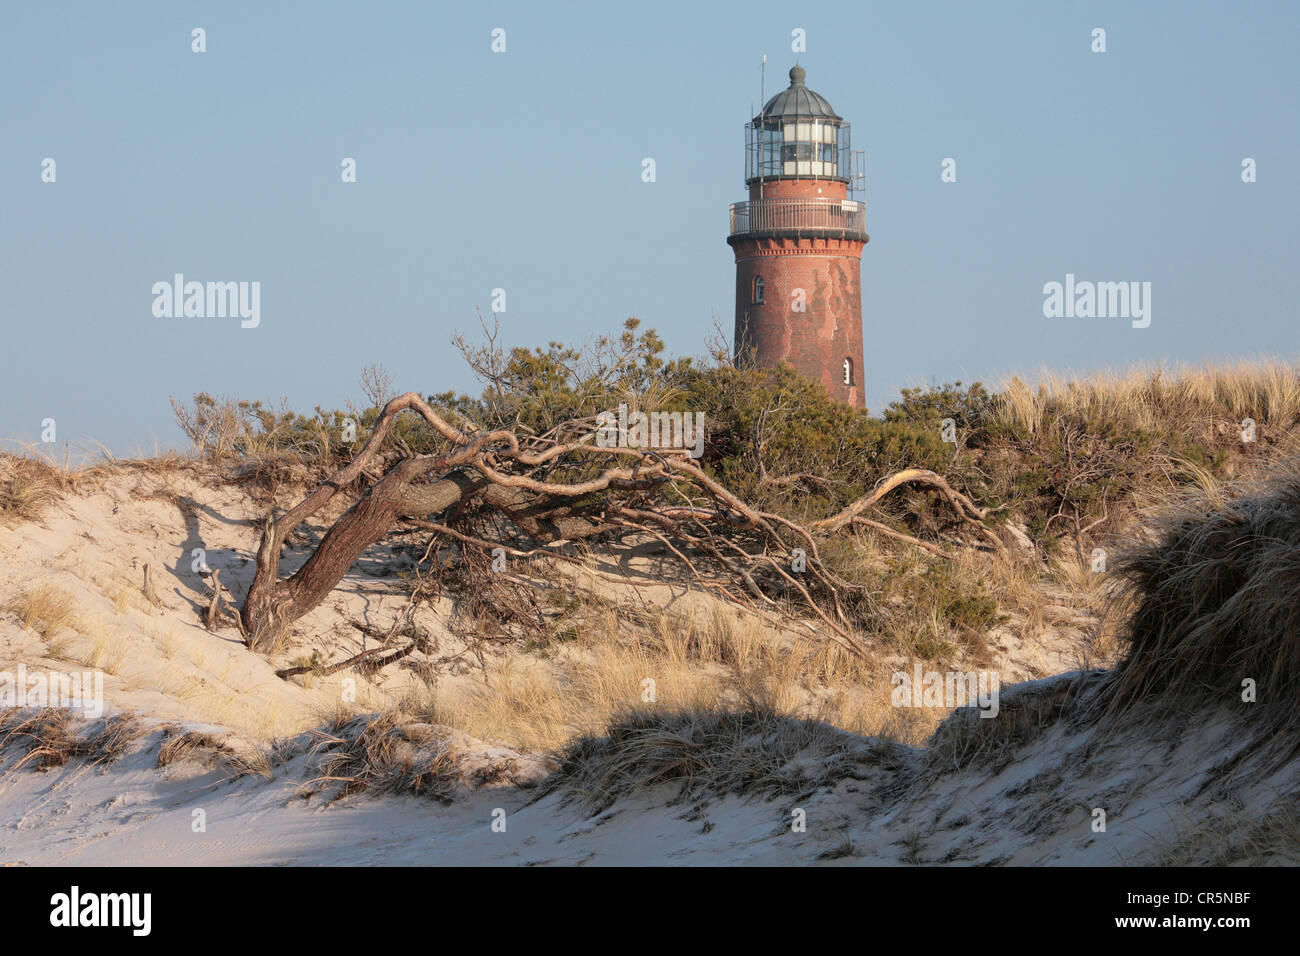 Dune with a wind-blown Scots Pine (Pinus sylvestris) on West Beach in front of the lighthouse on Darsser Ort near Prerow, Darss, Stock Photo